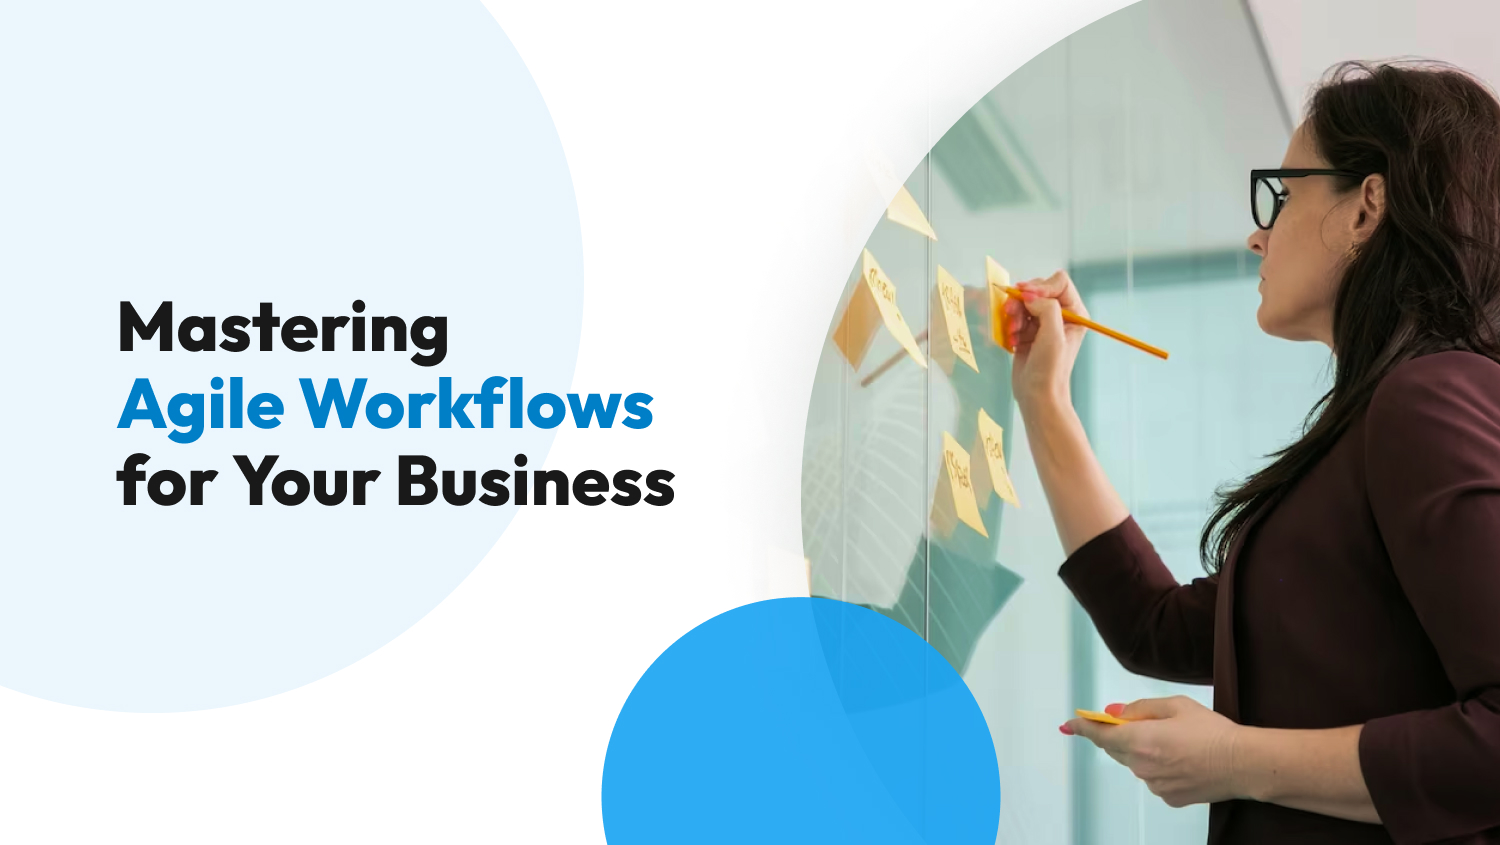 Mastering Agile Workflows for Your Business